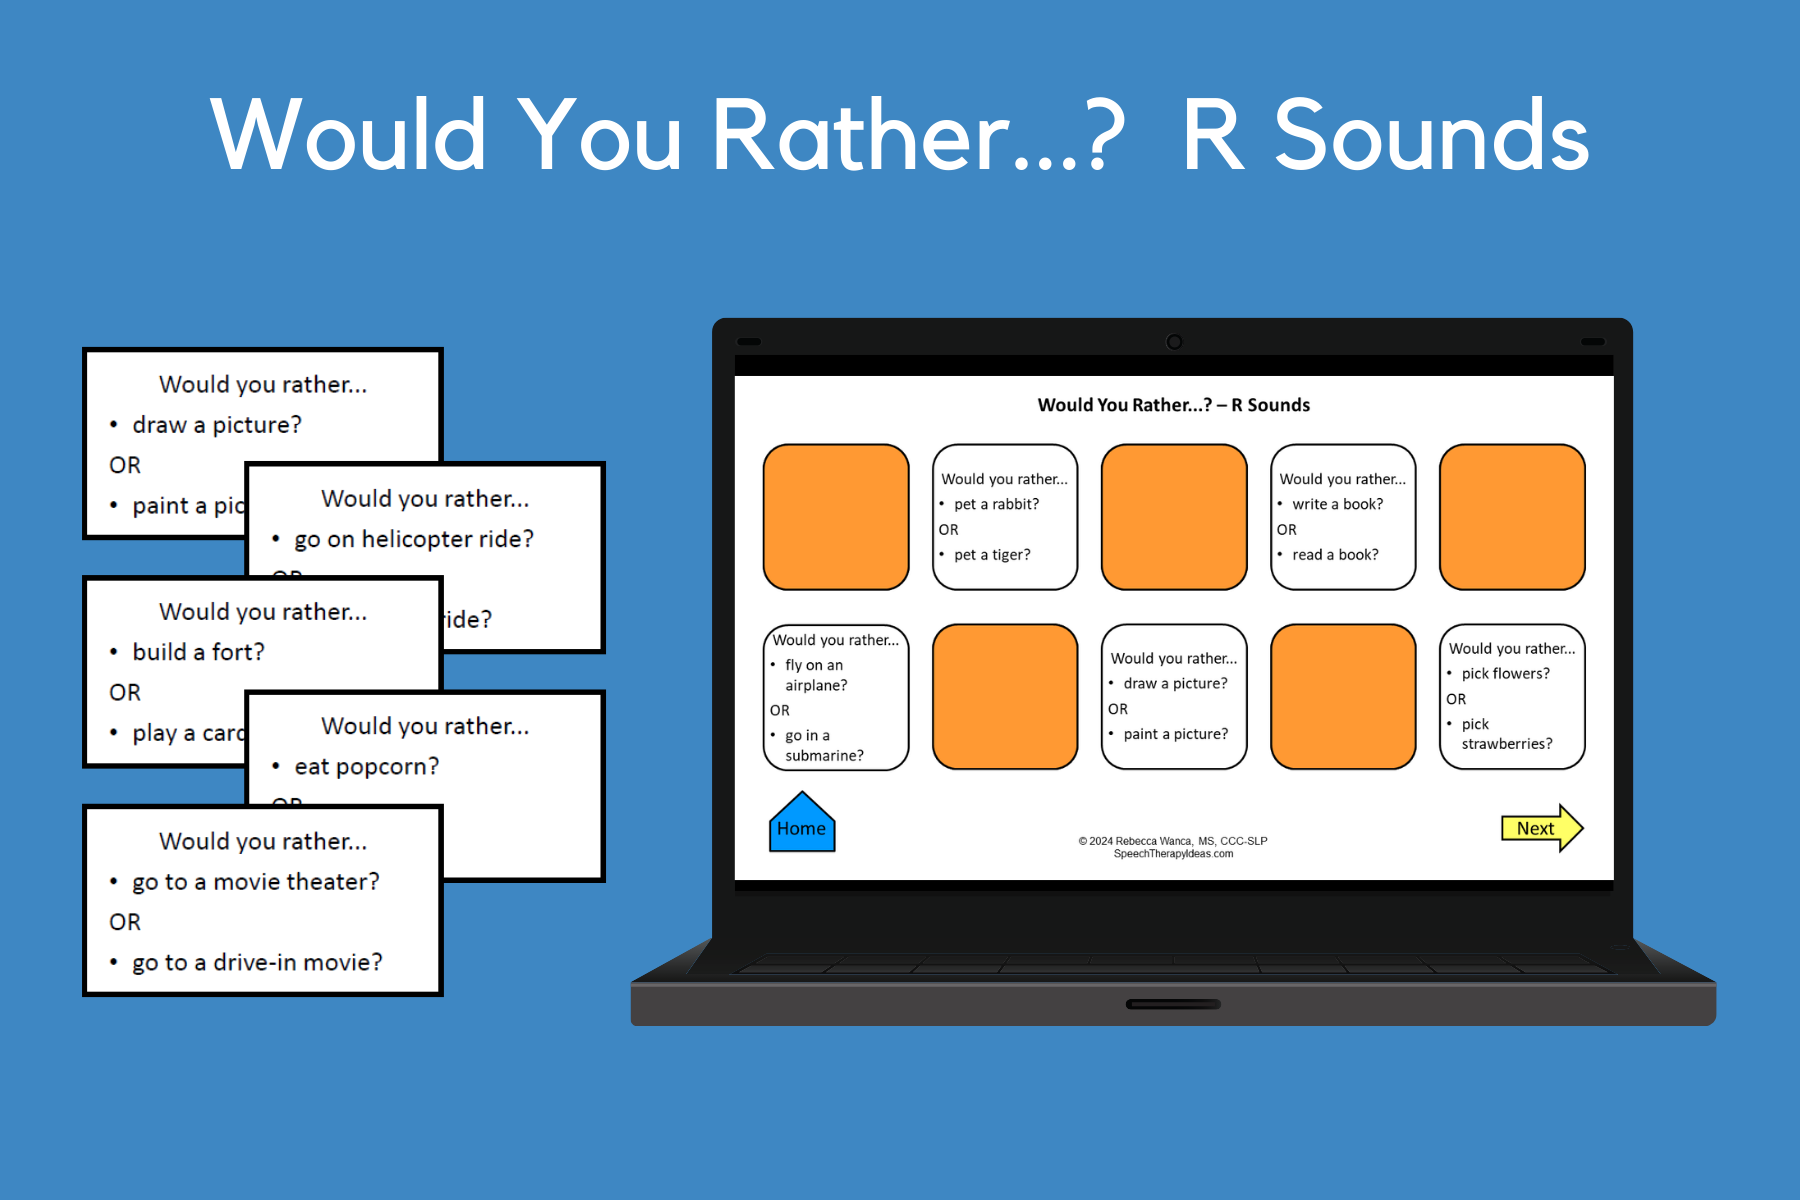 Would You Rather…? For R Sounds